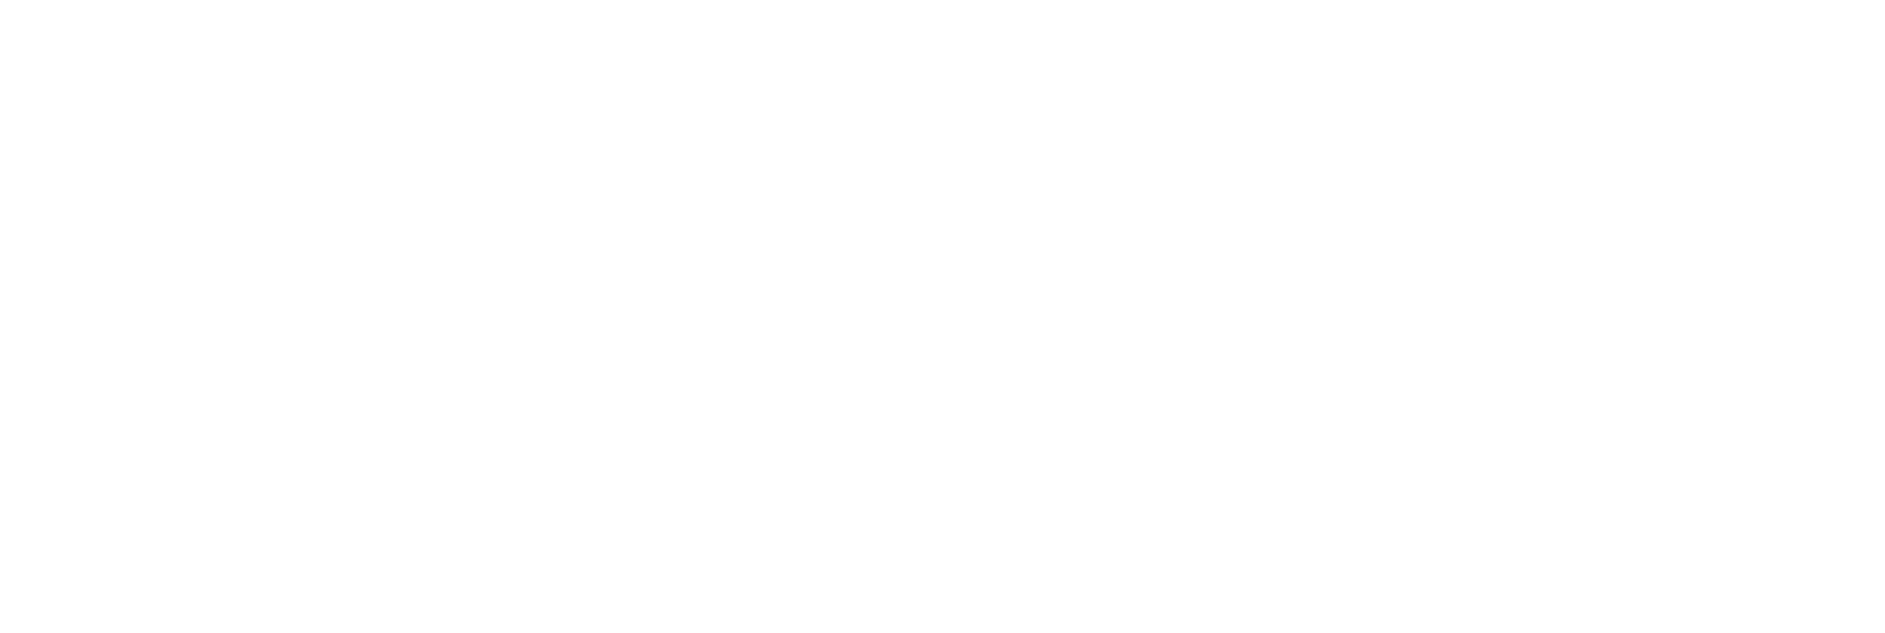 PayPal Accepted Logo - Buying Online and Paying with PayPal | PayPal UK